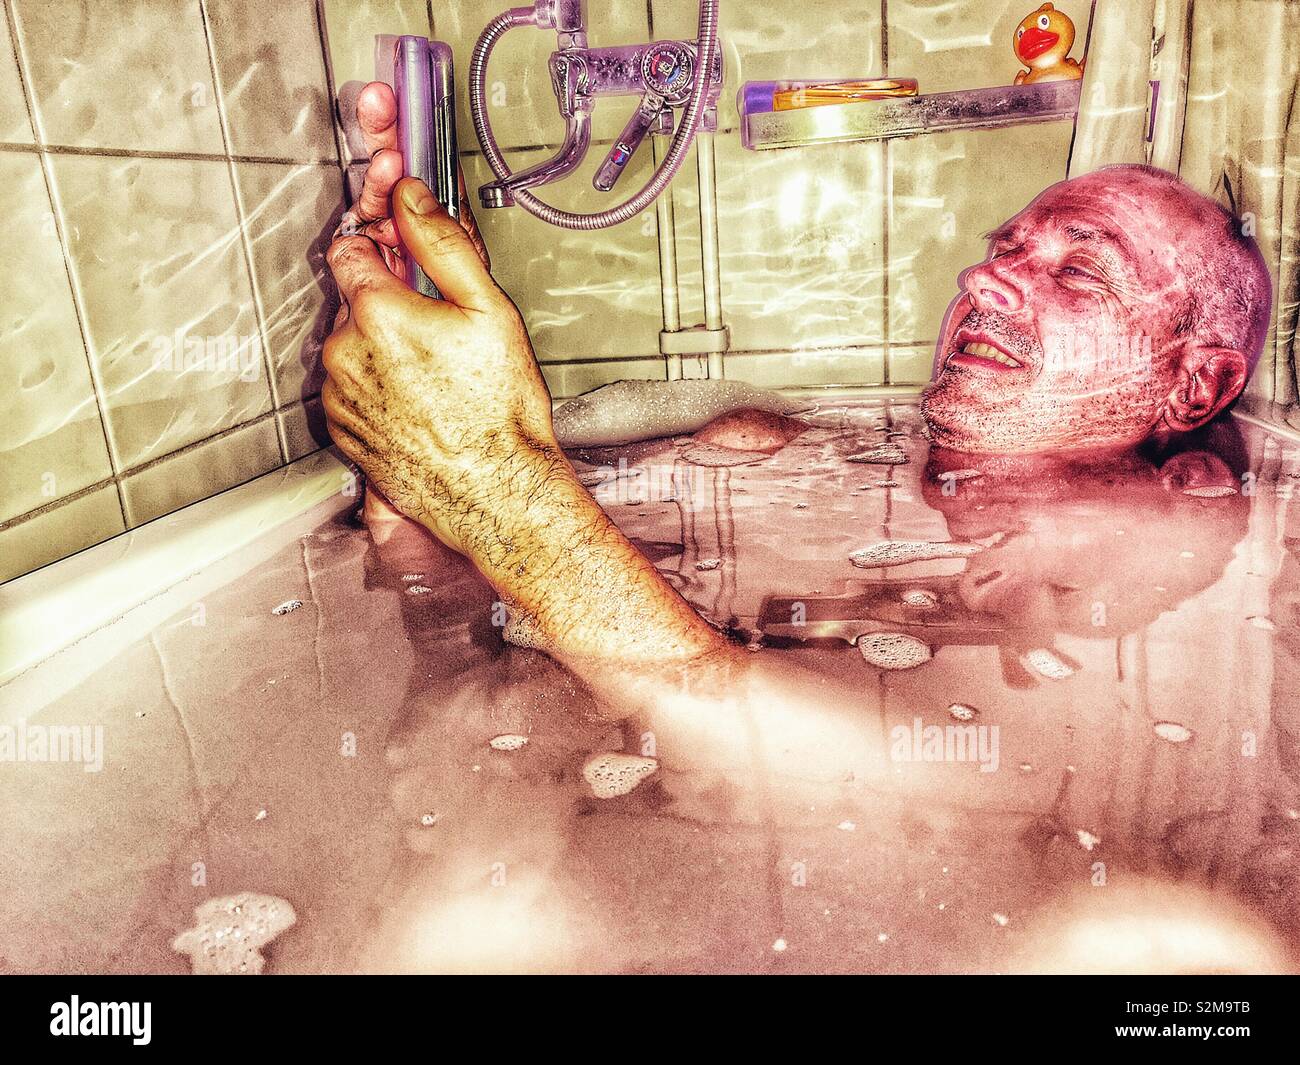 Middle aged smiling Swedish man in bath with mobile, Sweden Stock Photo